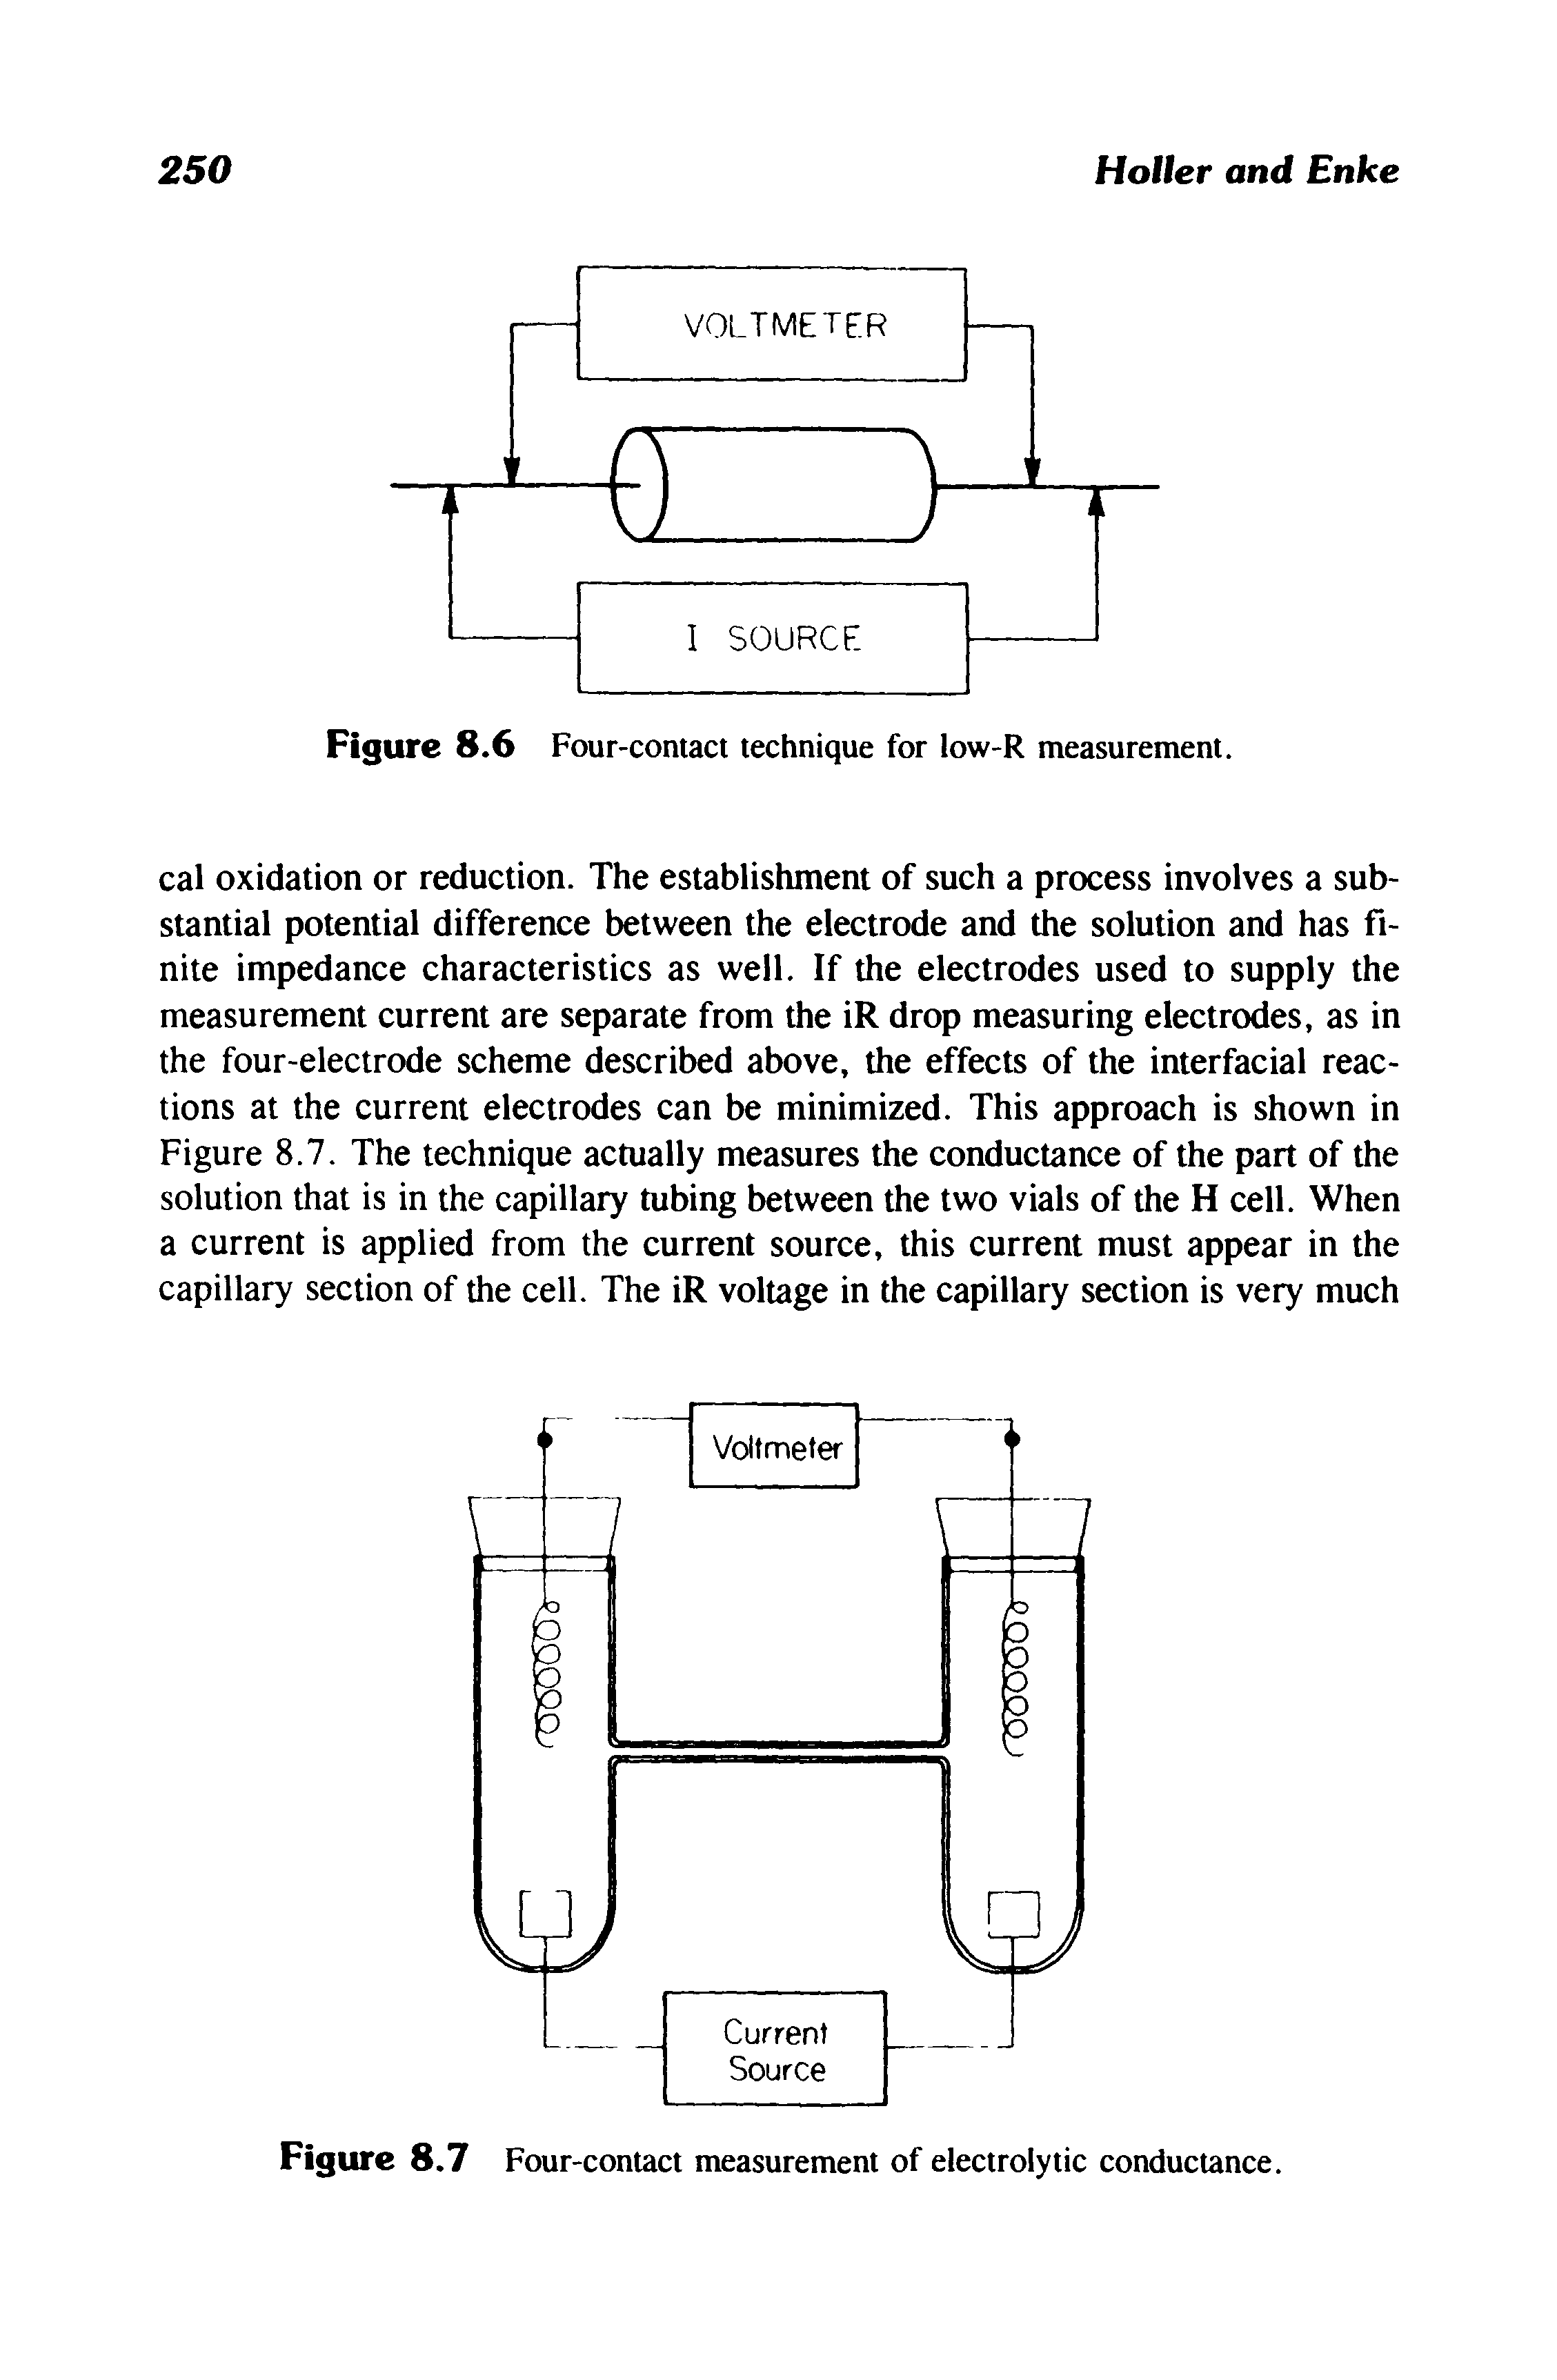 Figure 8.7 Four-contact measurement of electrolytic conductance.